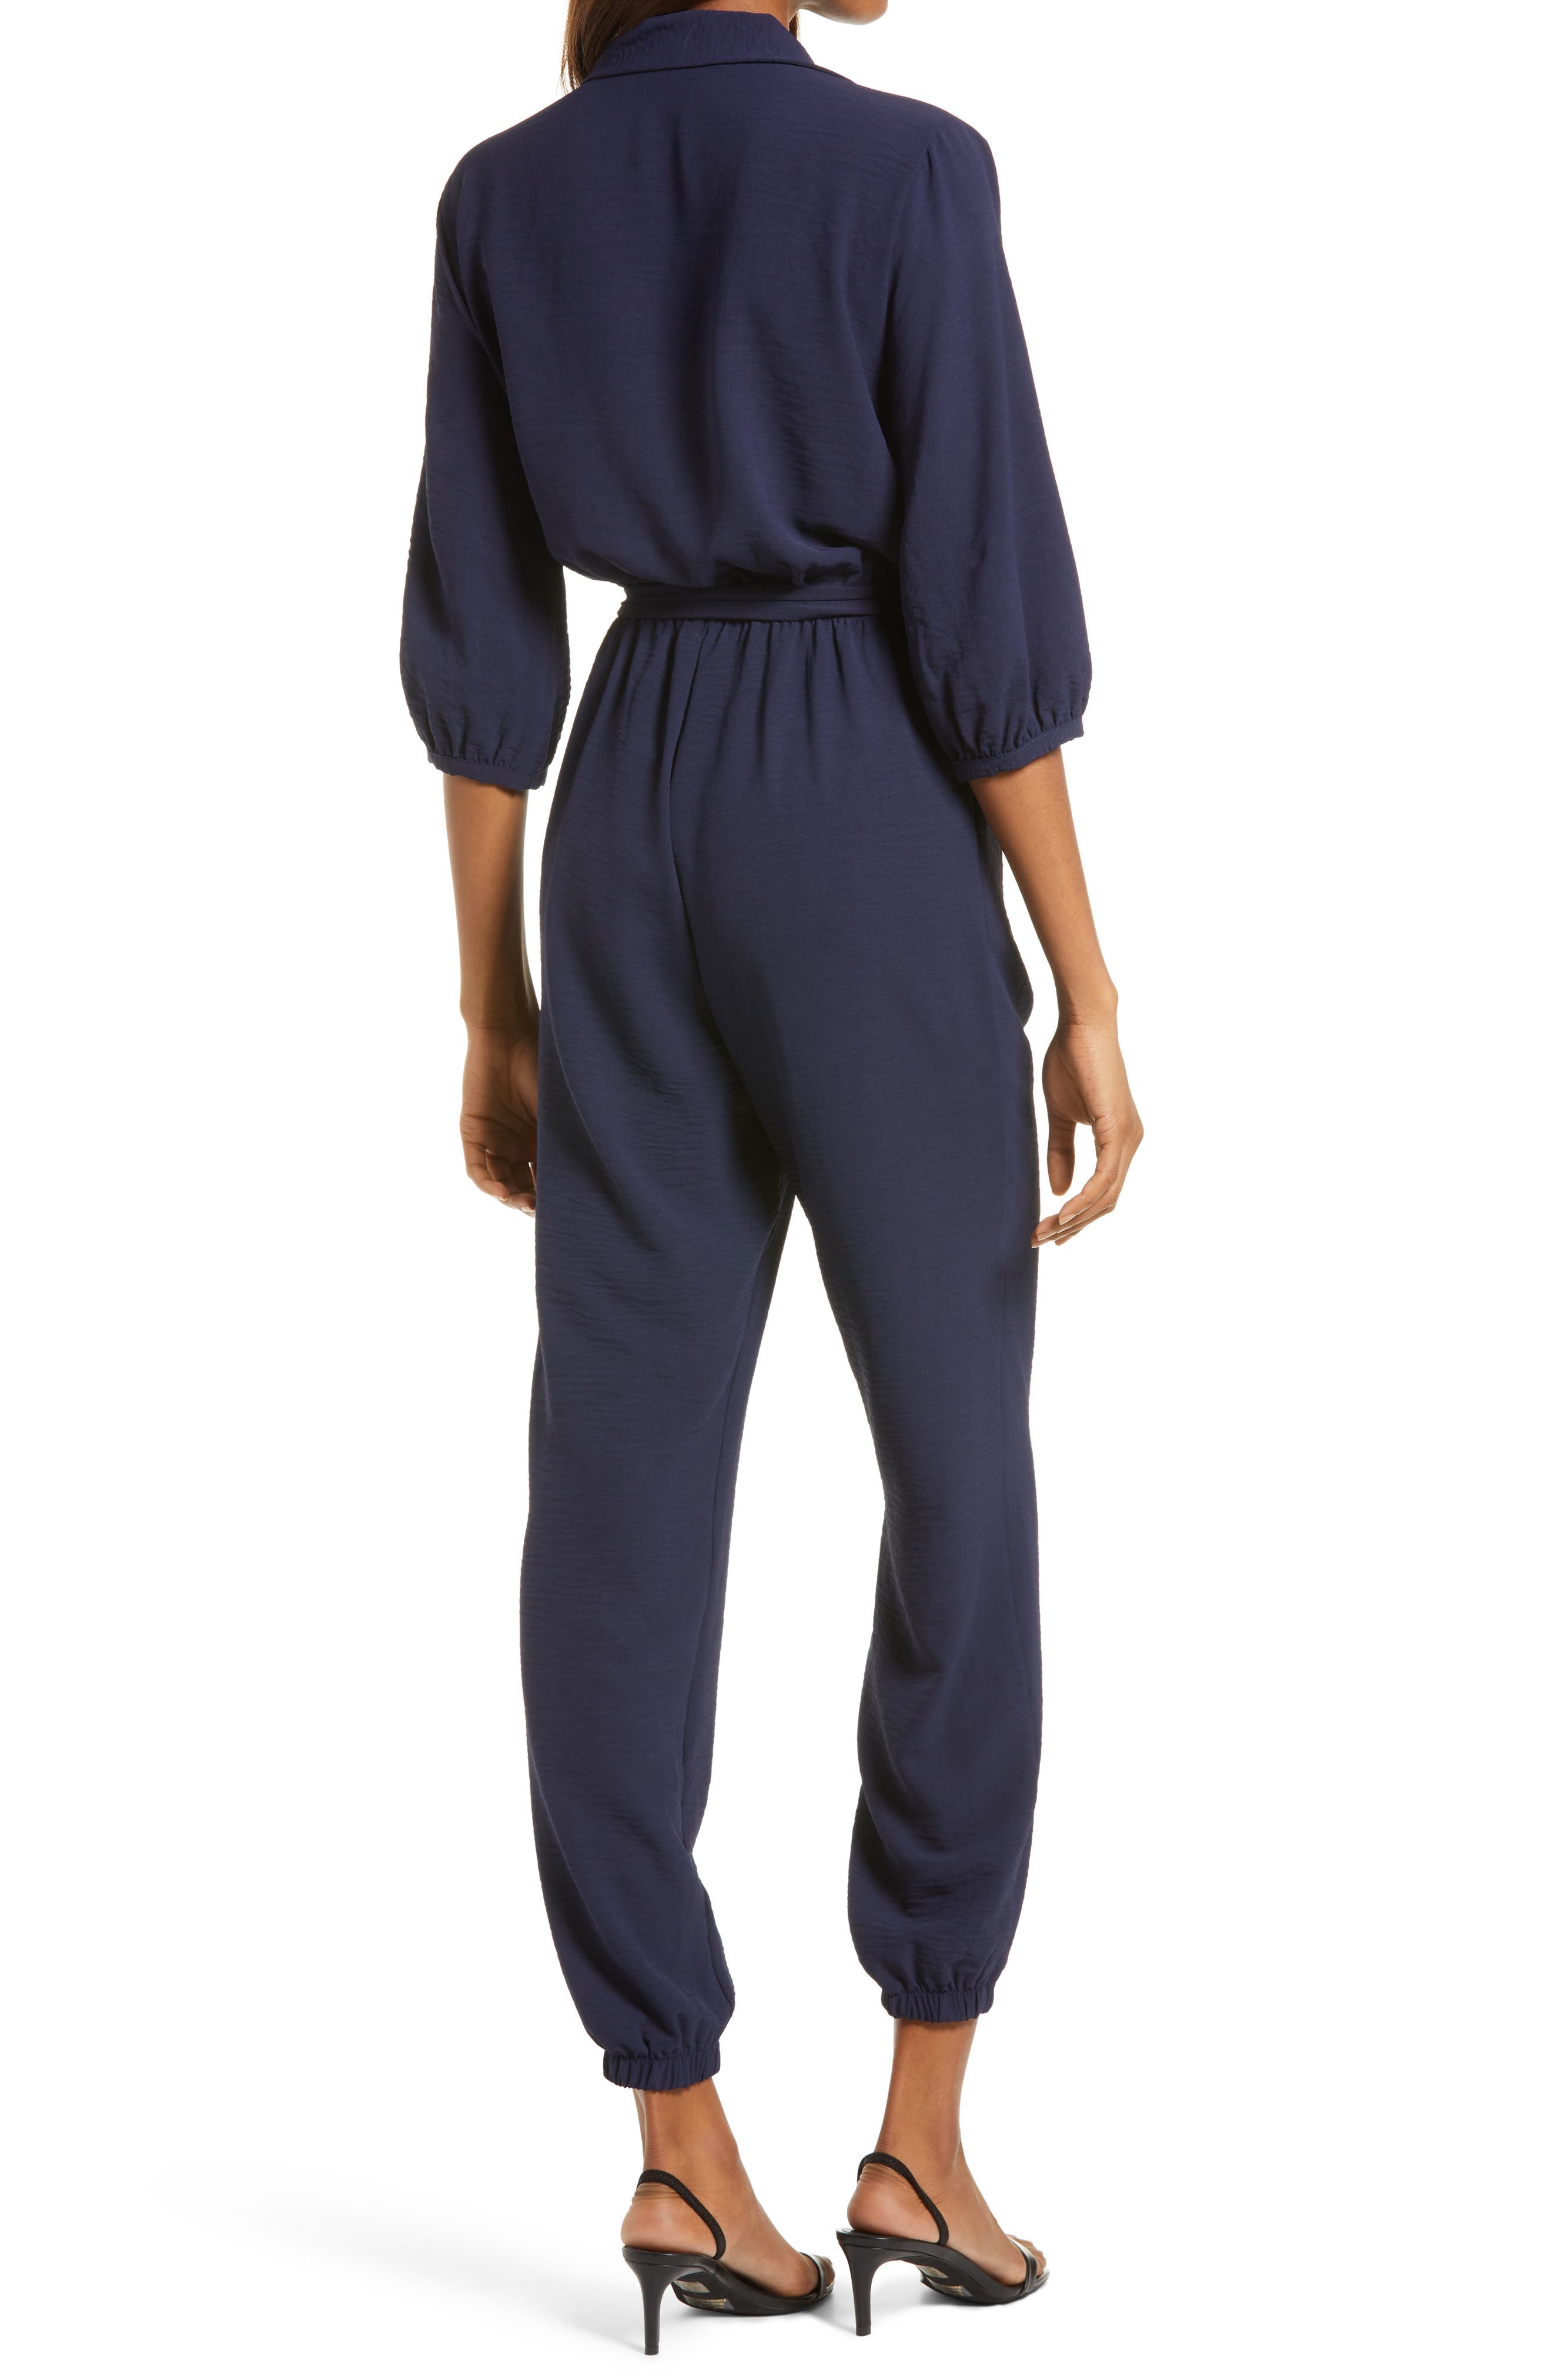 WOMEN FASHION Baby Jumpsuits & Dungarees Casual Navy Blue discount 58% Yoins jumpsuit 